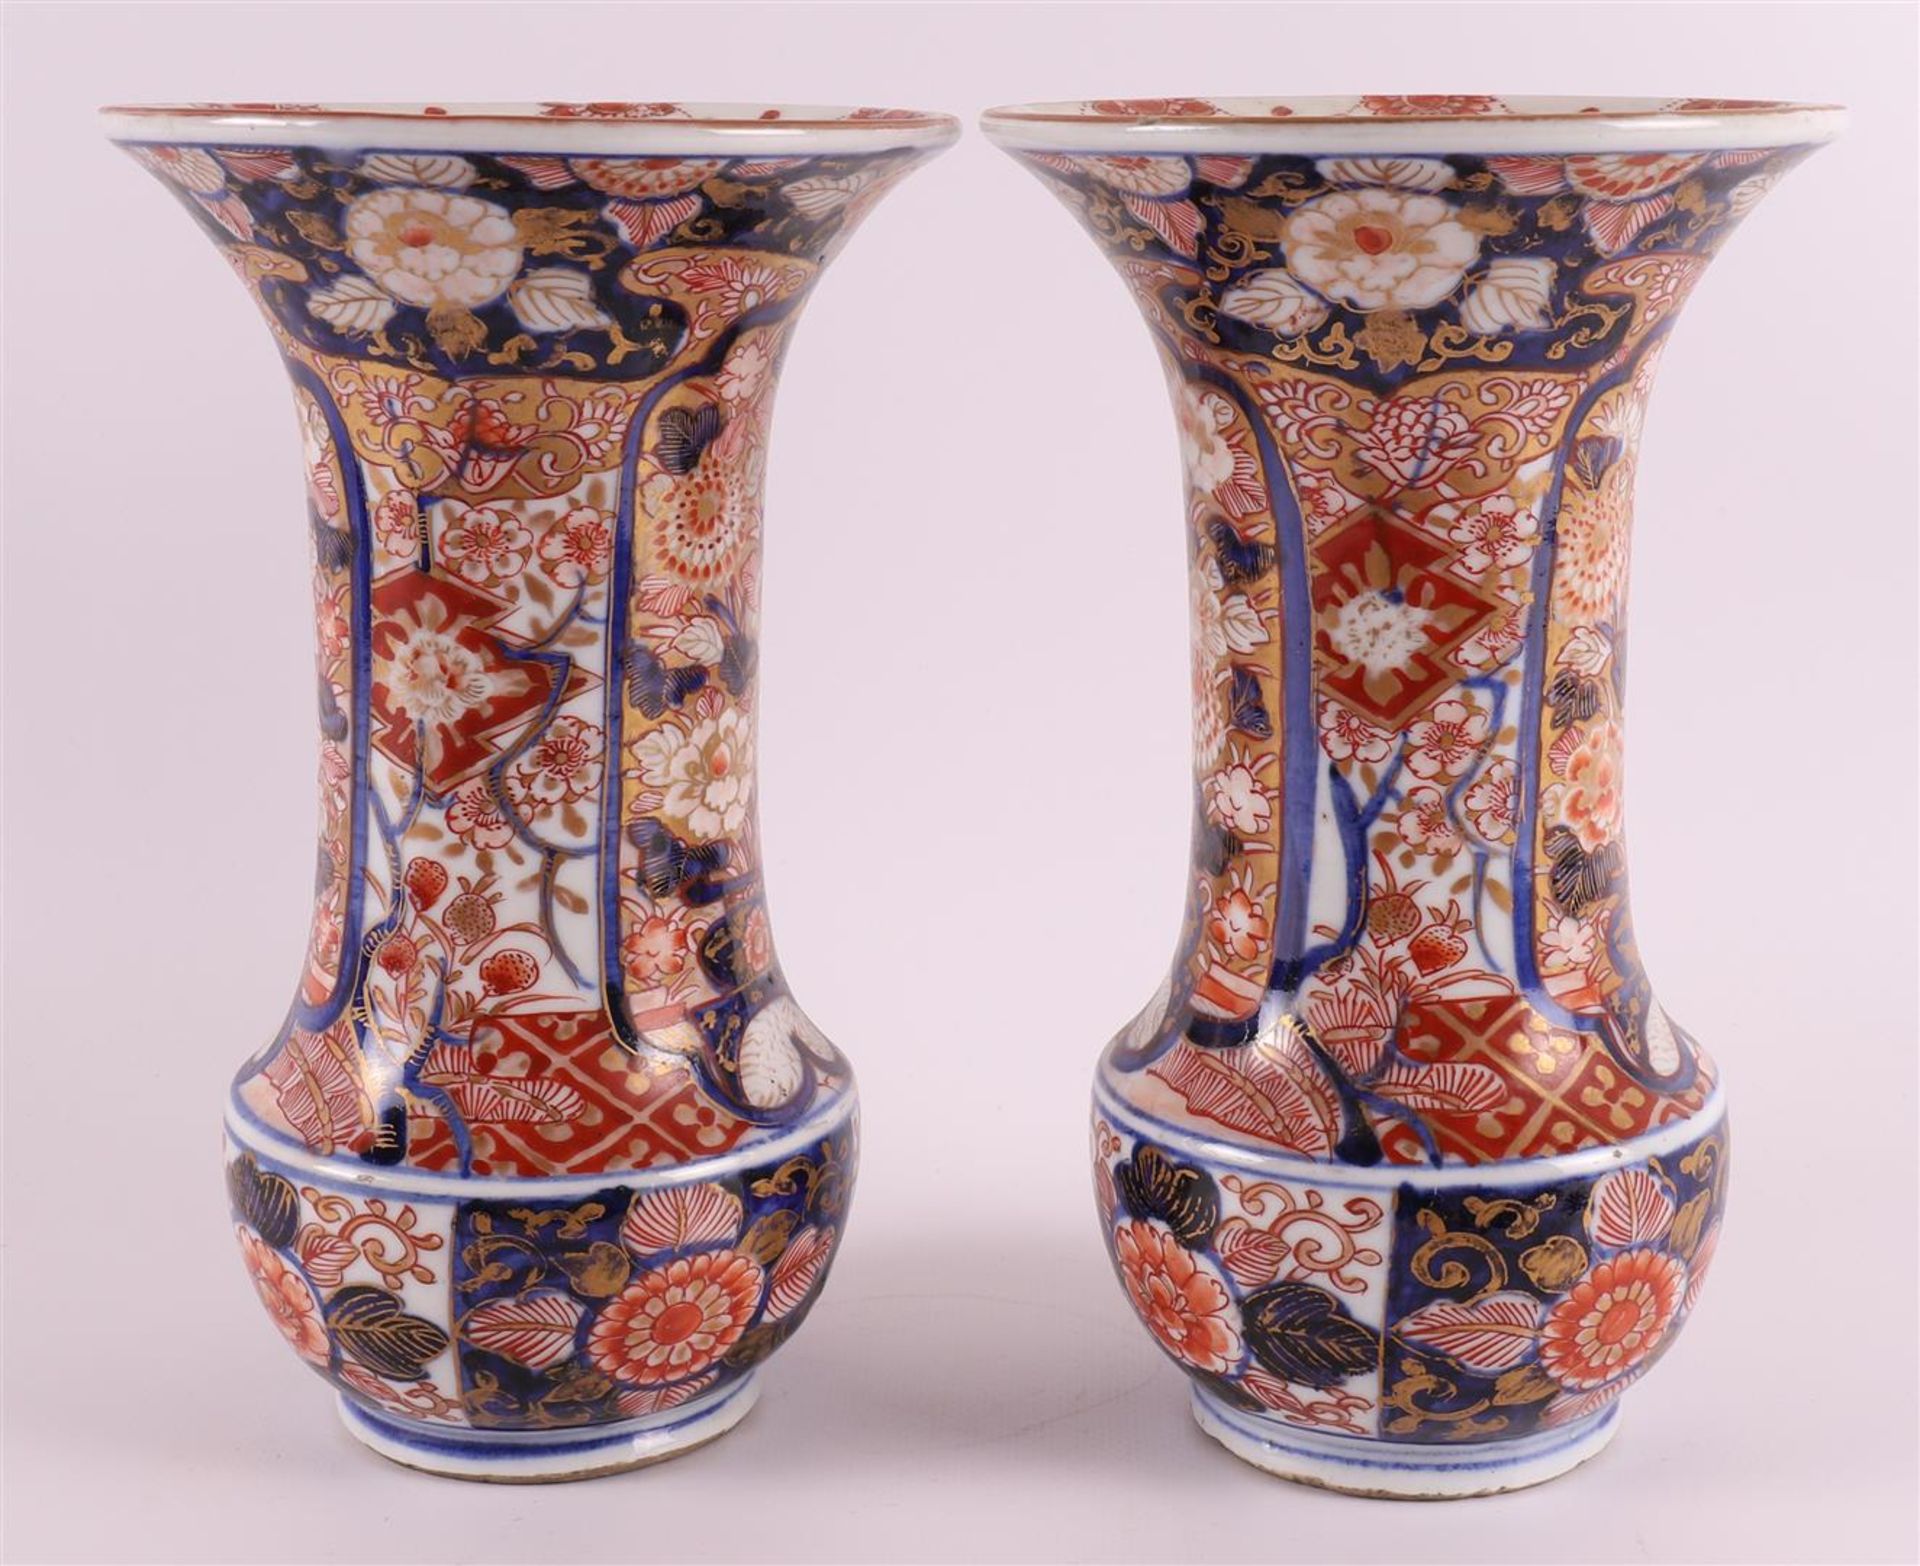 A five-piece porcelain Imari cabinet set, consisting of: three lidded vases and two vases with - Image 15 of 17